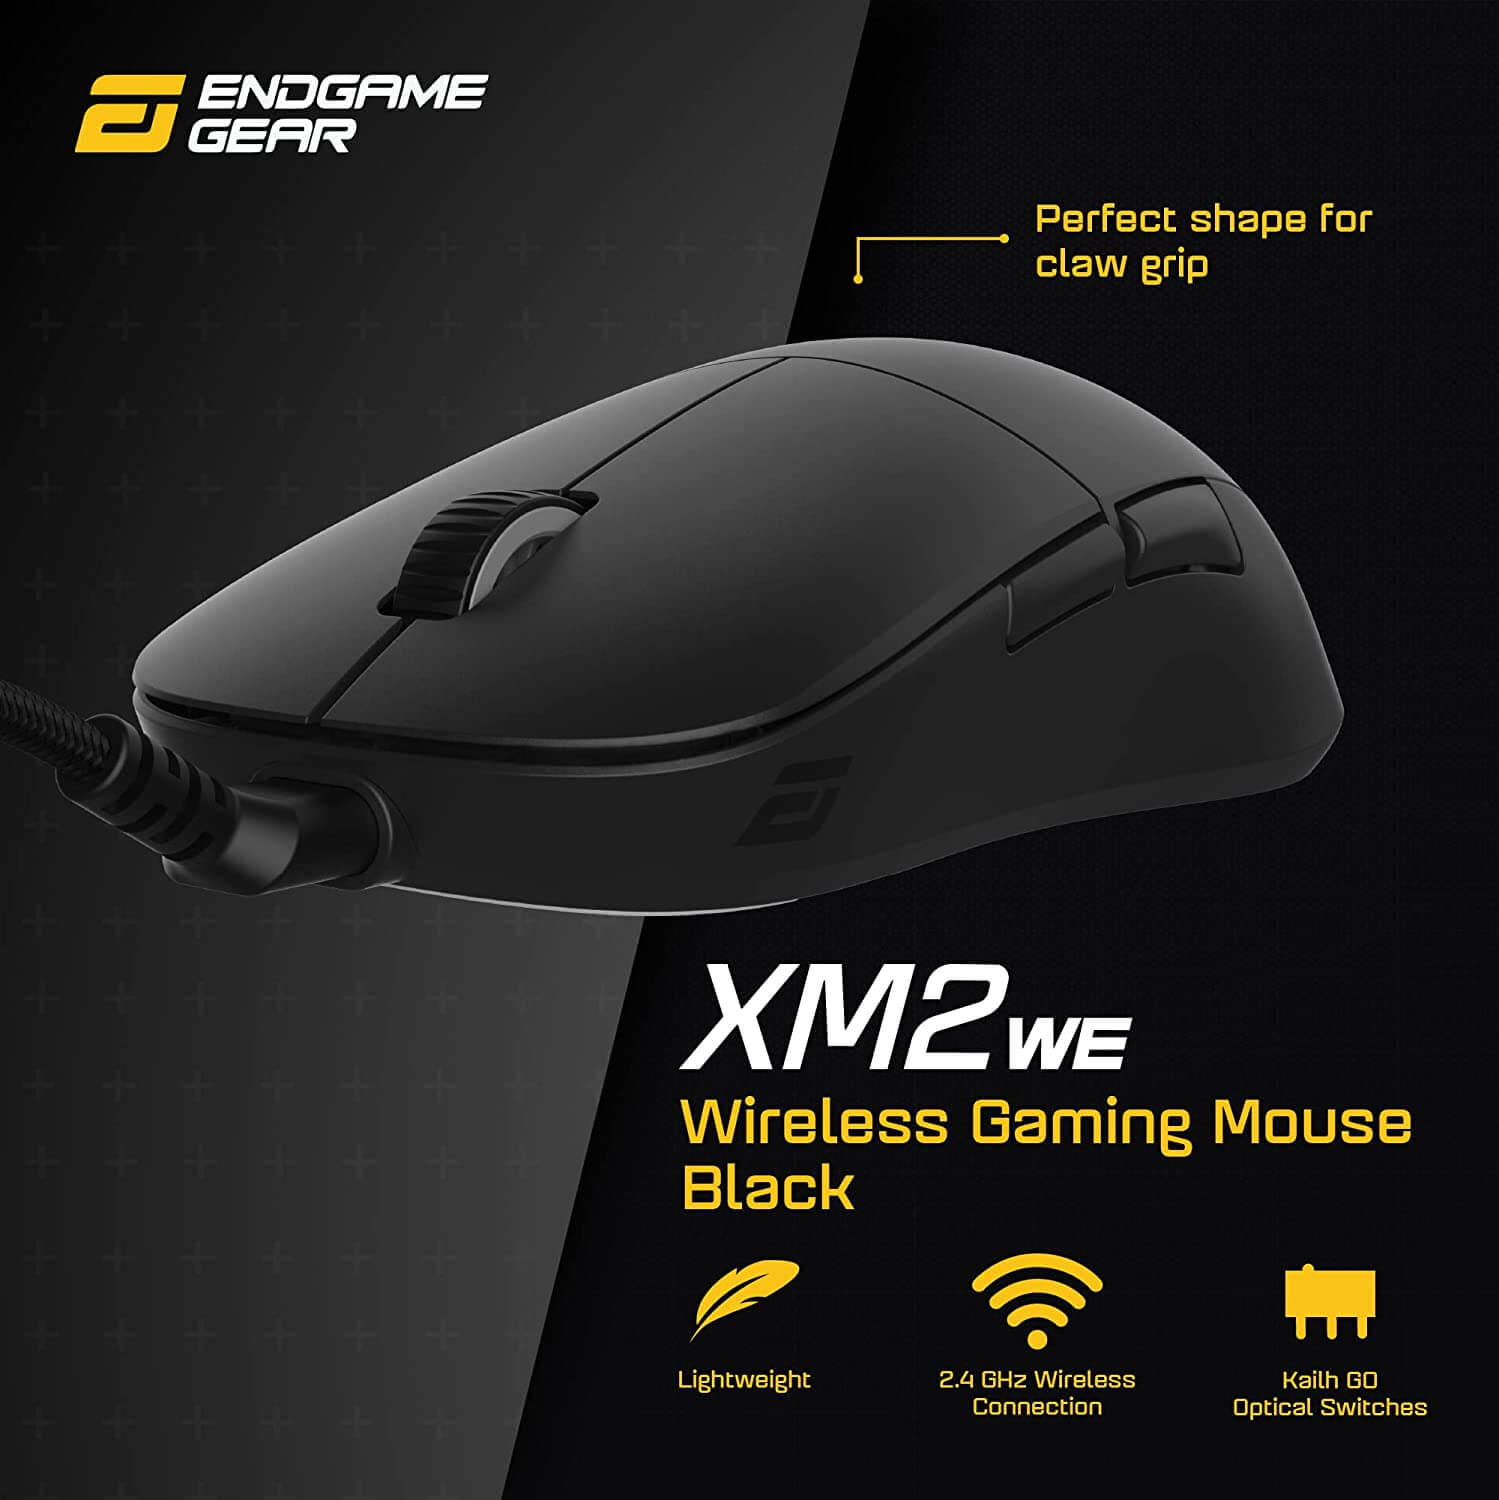 XM2we Wireless Gaming Mouse Black Page Mobile TTD 6